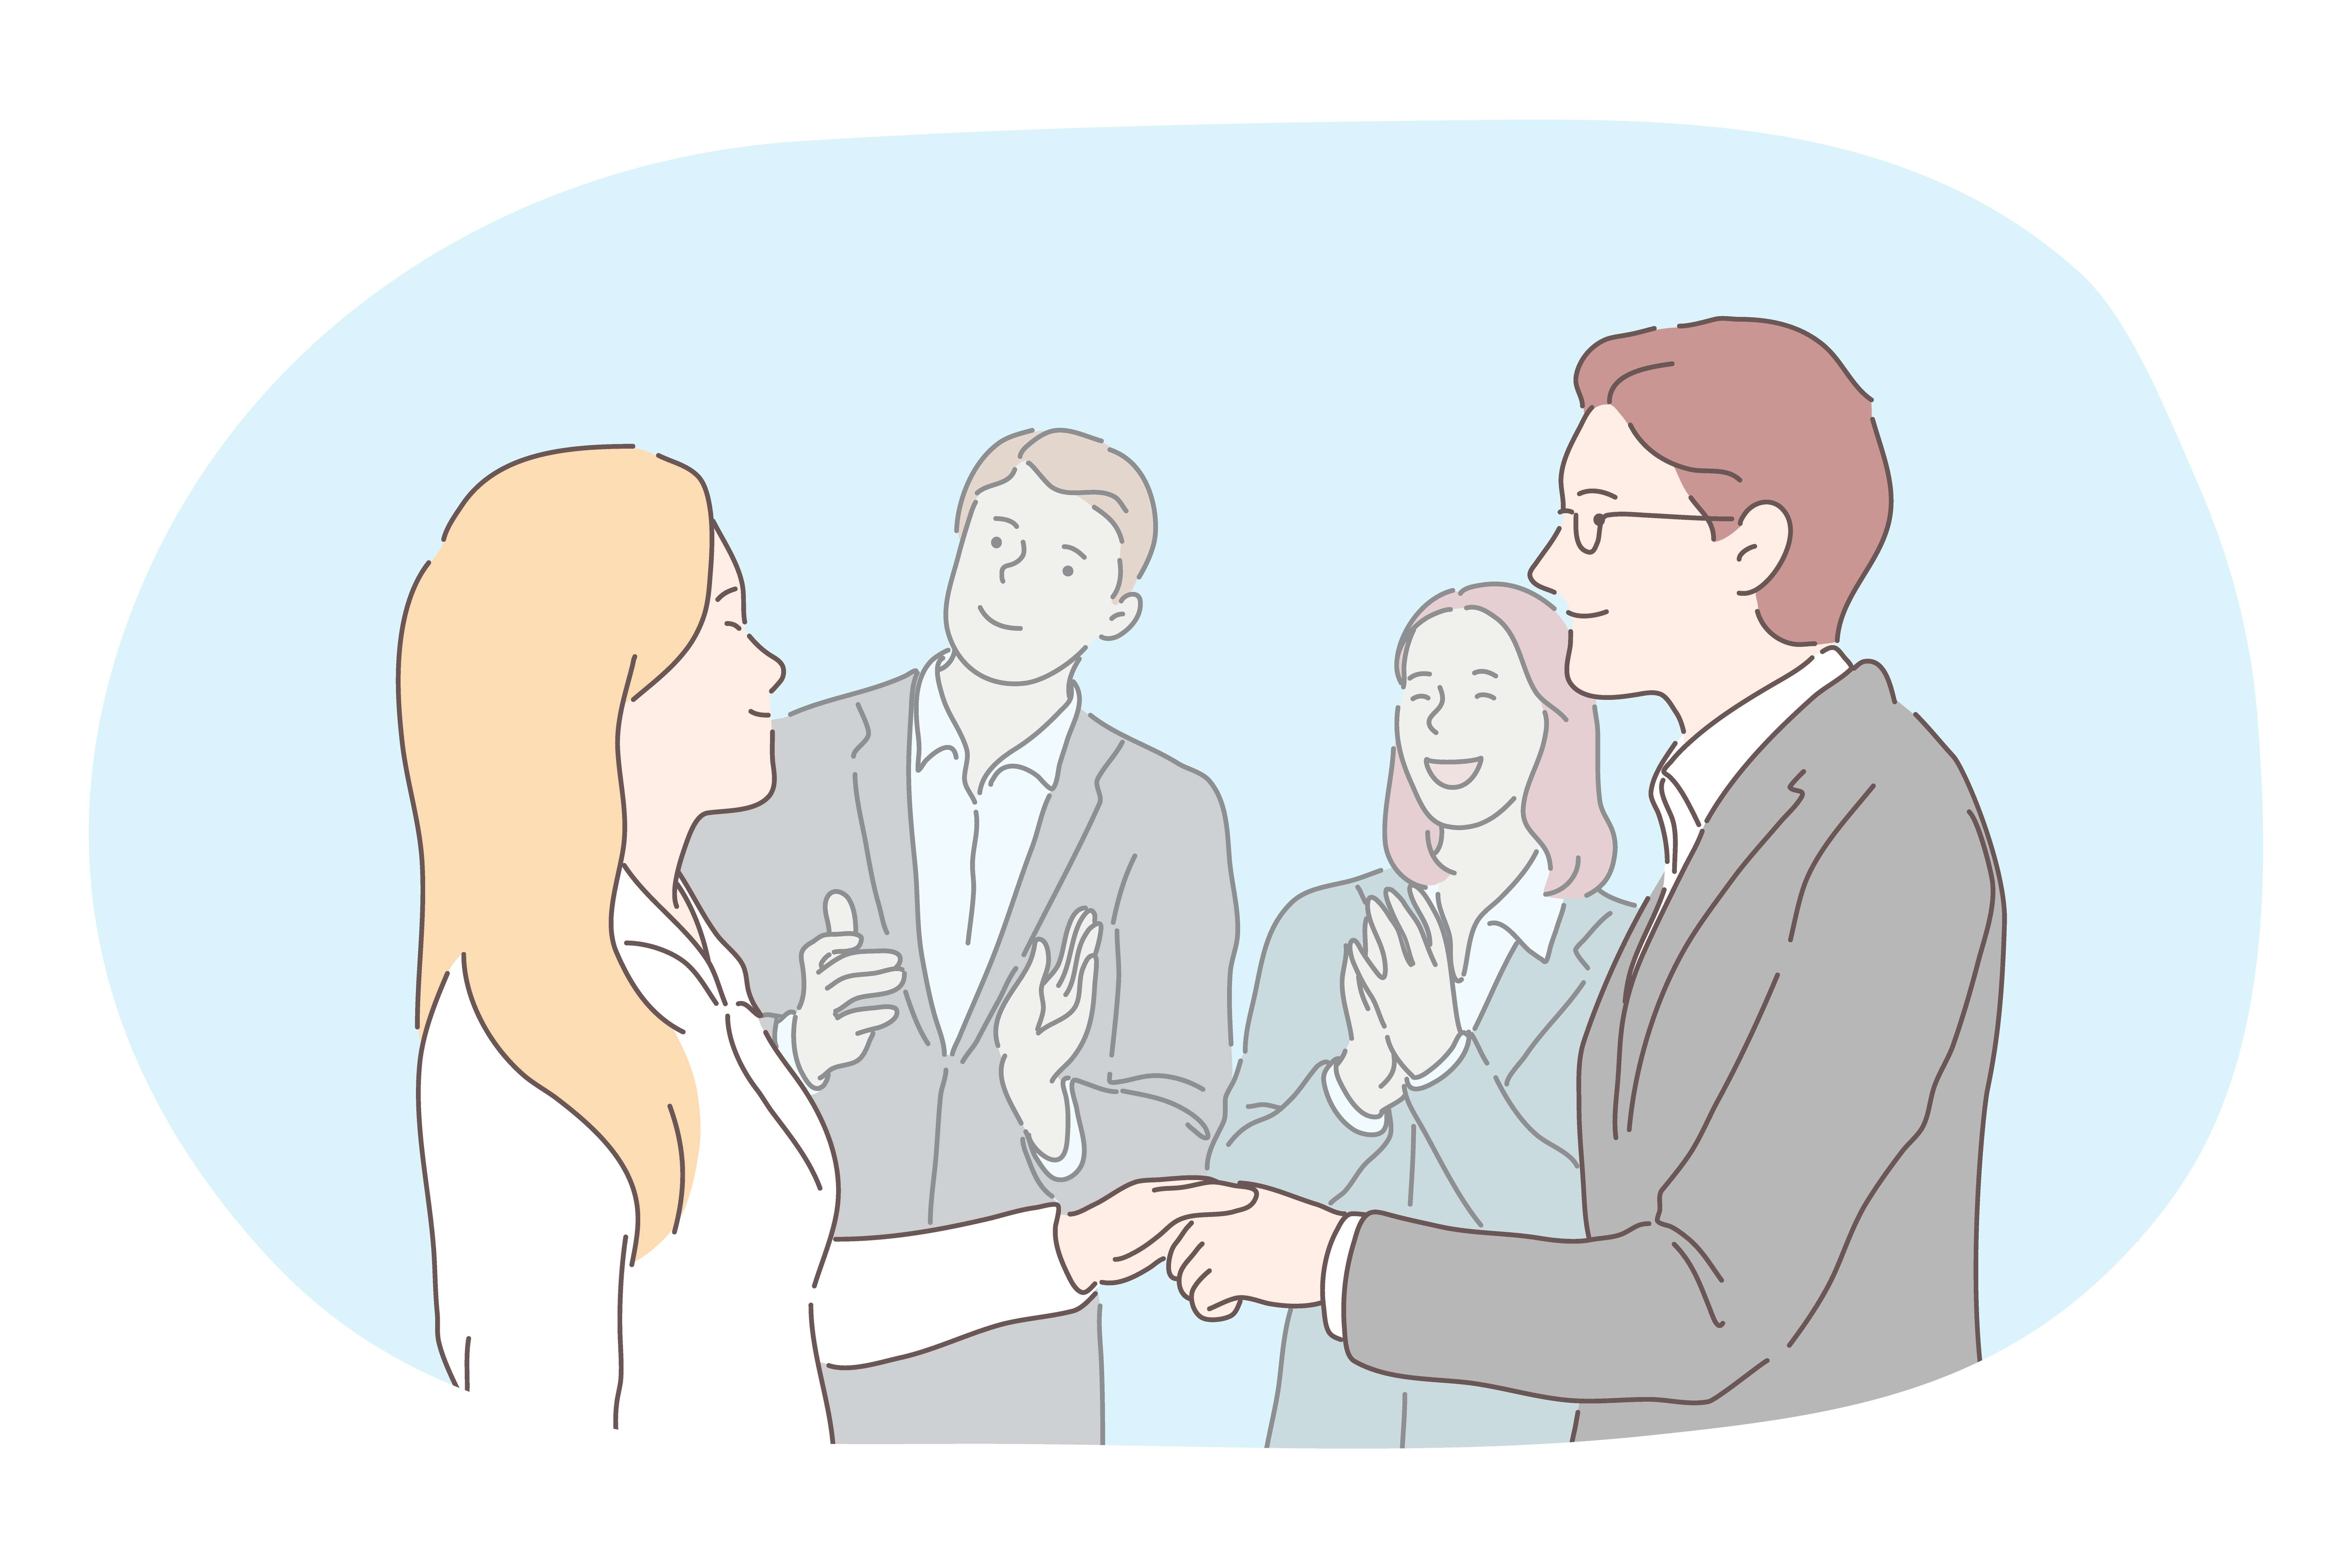 Agreement, deal, business, successful negotiations, teamwork concept. Young business people man and woman cartoon characters standing shaking hands after negotiations over smiling clapping colleagues. Agreement, deal, business, successful negotiations, teamwork concept